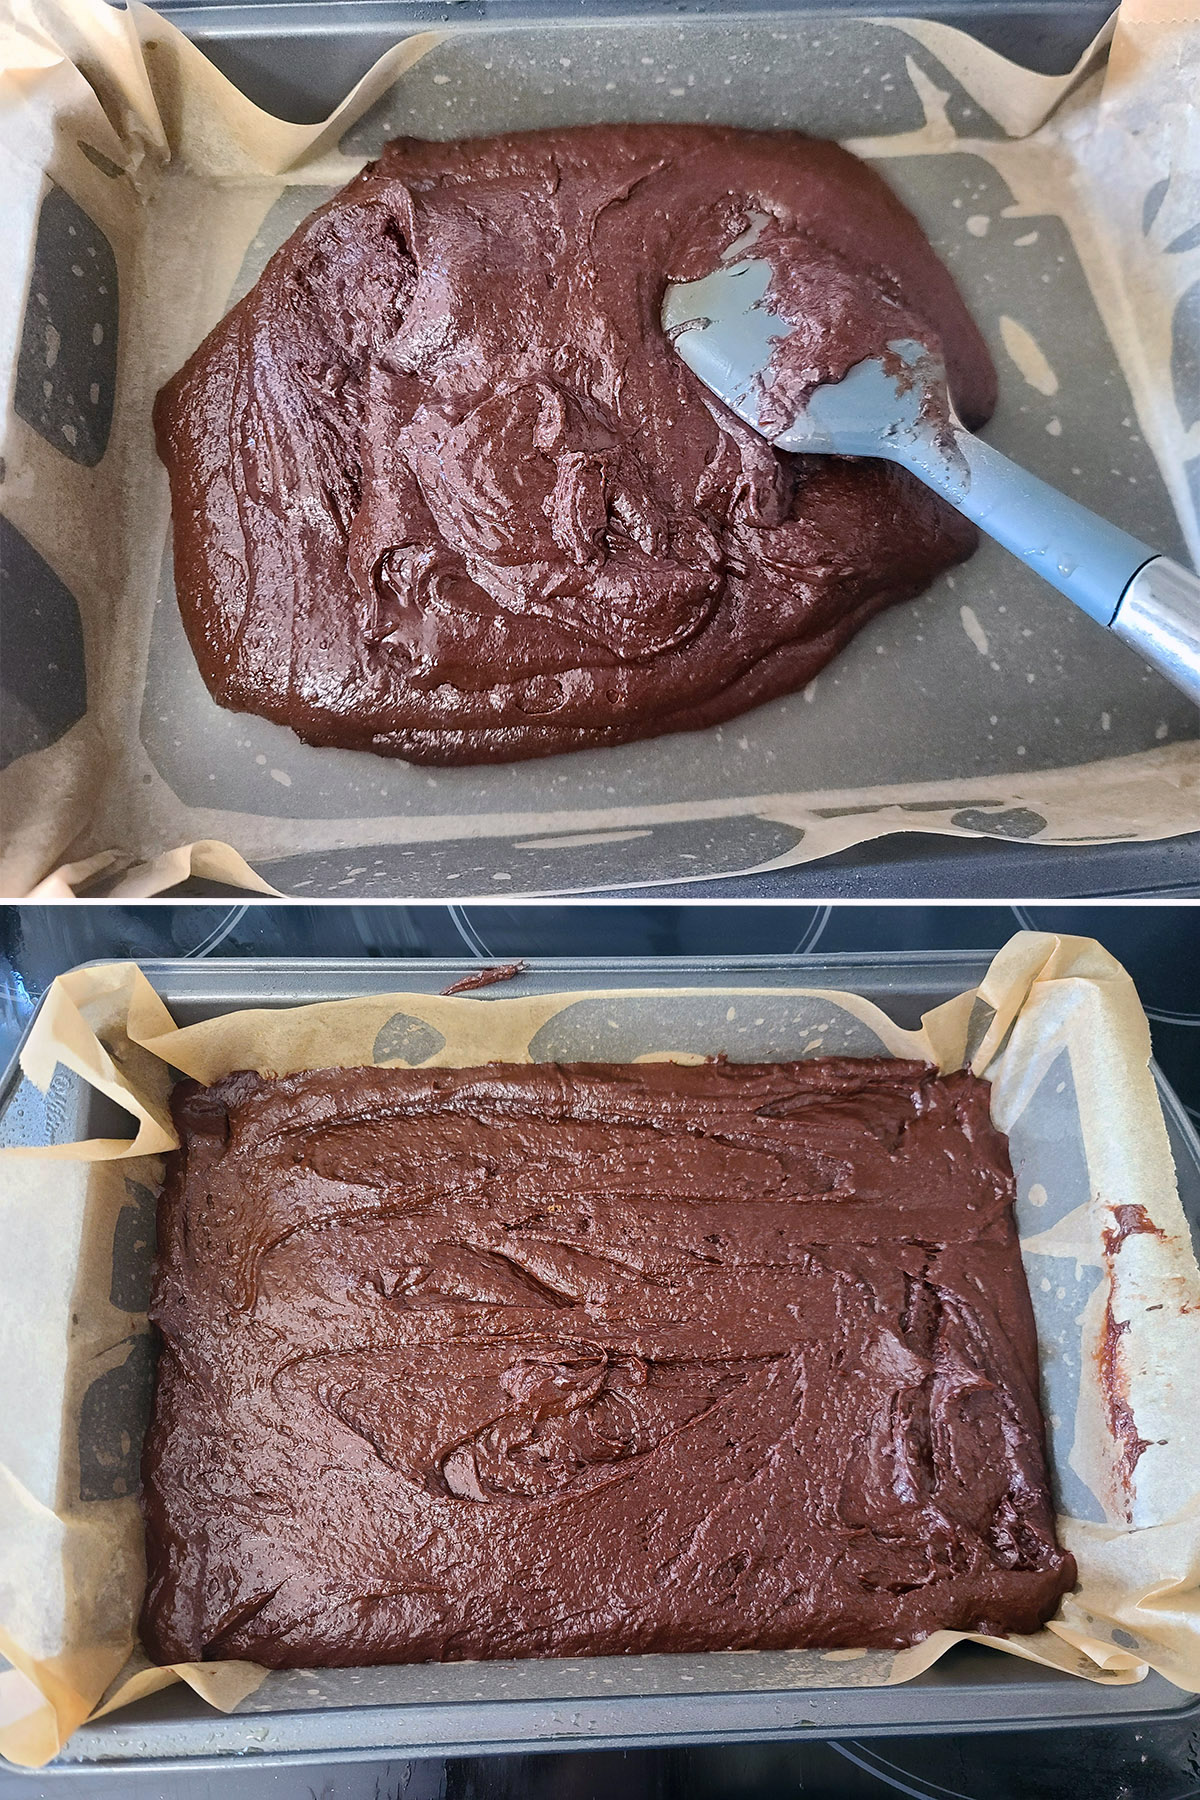 A 2 part image showing the brownie batter being spread in the prepared pan.